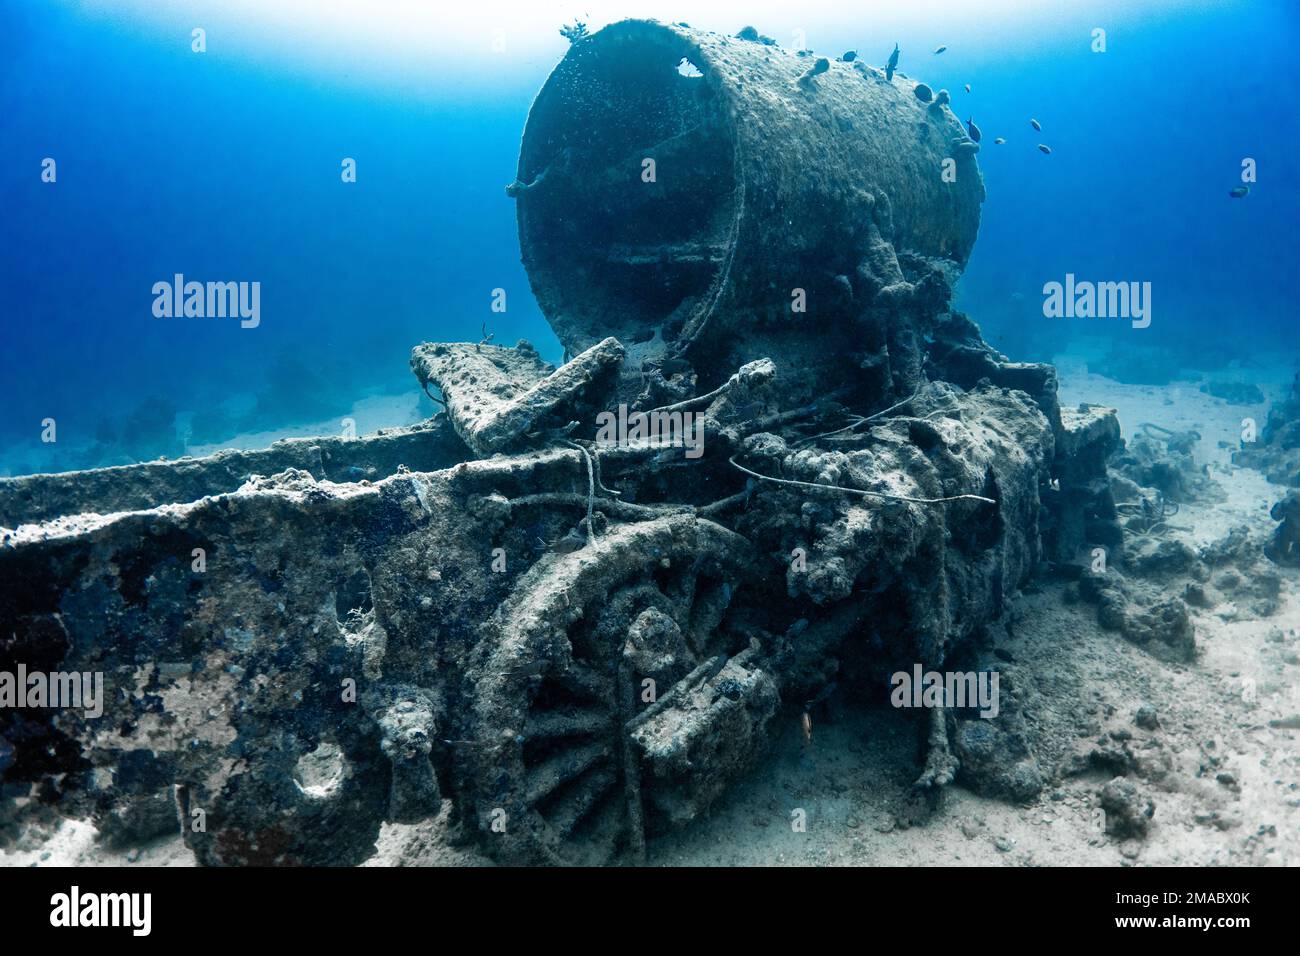 The London, Midland and Scottish Railway (LMS) Stanier Class 8F is a class of steam locomotives found near thistlegorm wreck, red Sea Egypt Stock Photo